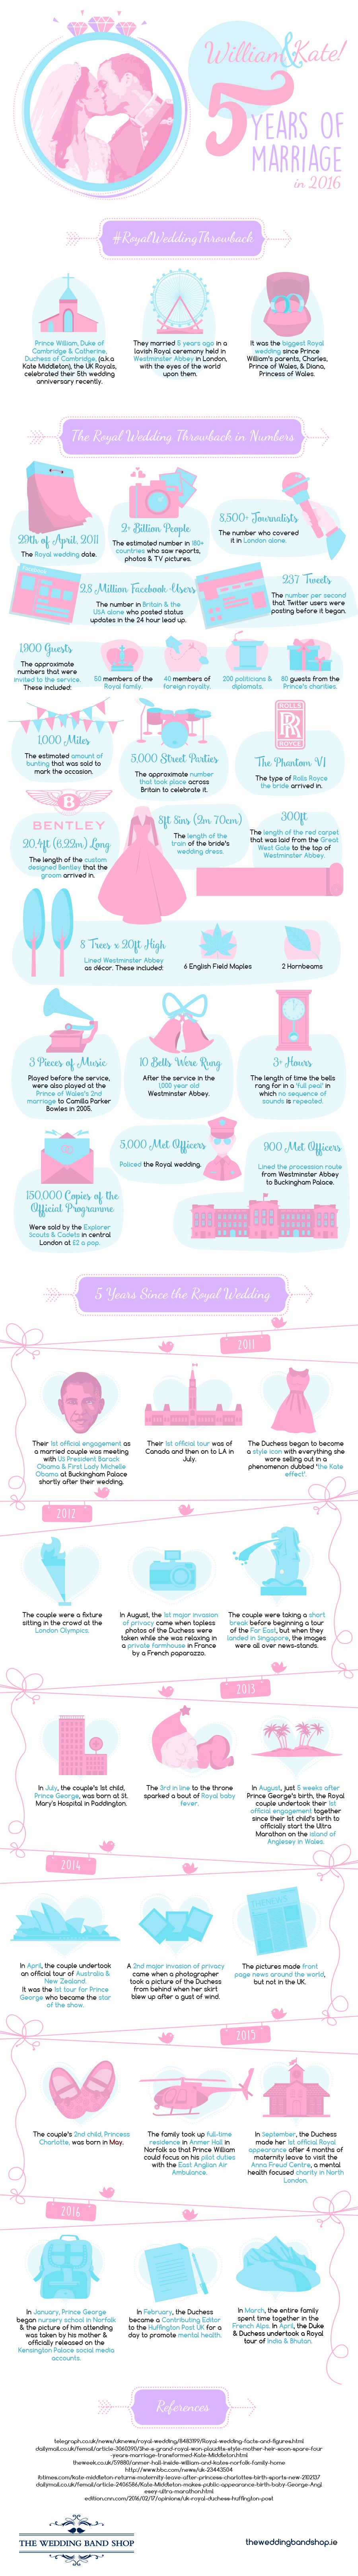 (Infographic) William & Kate, 5 Years of Marriage in 2016!